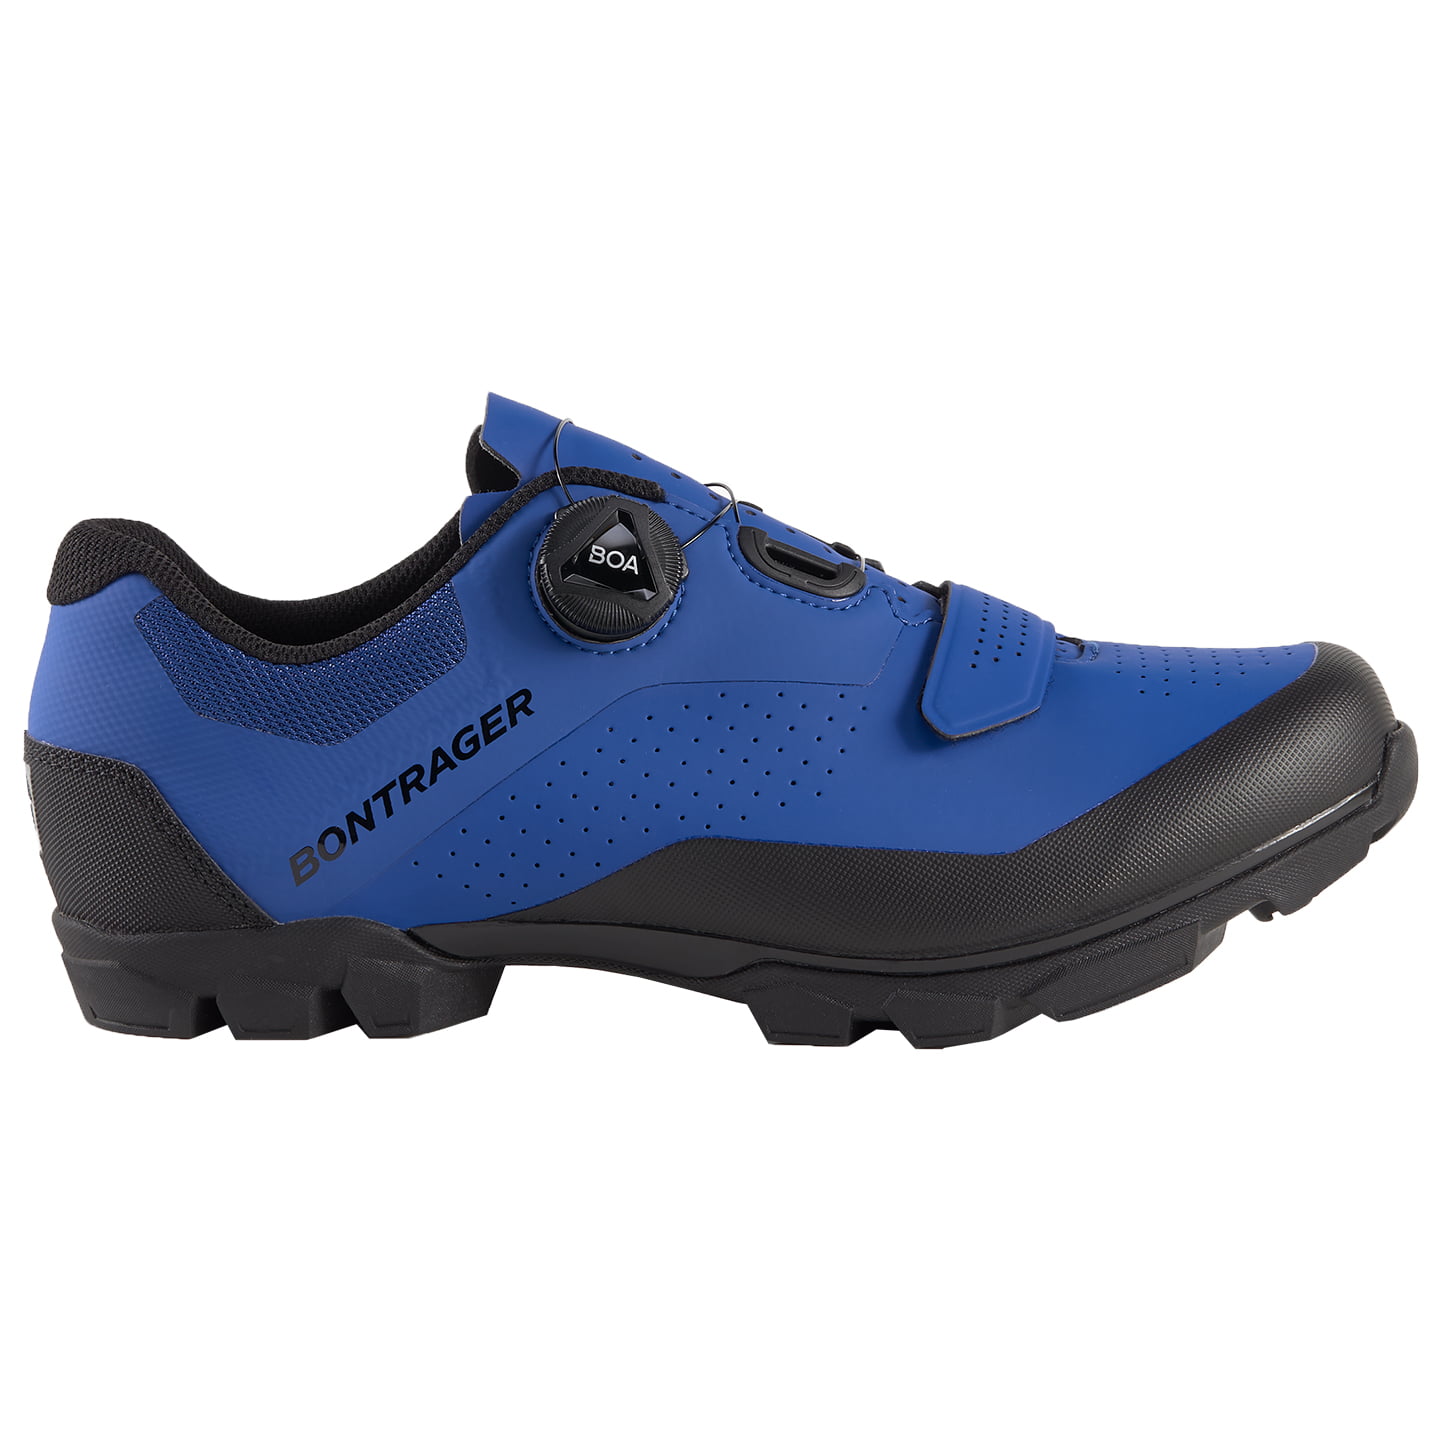 BONTRAGER Foray MTB Shoes MTB Shoes, for men, size 47, Cycling shoes